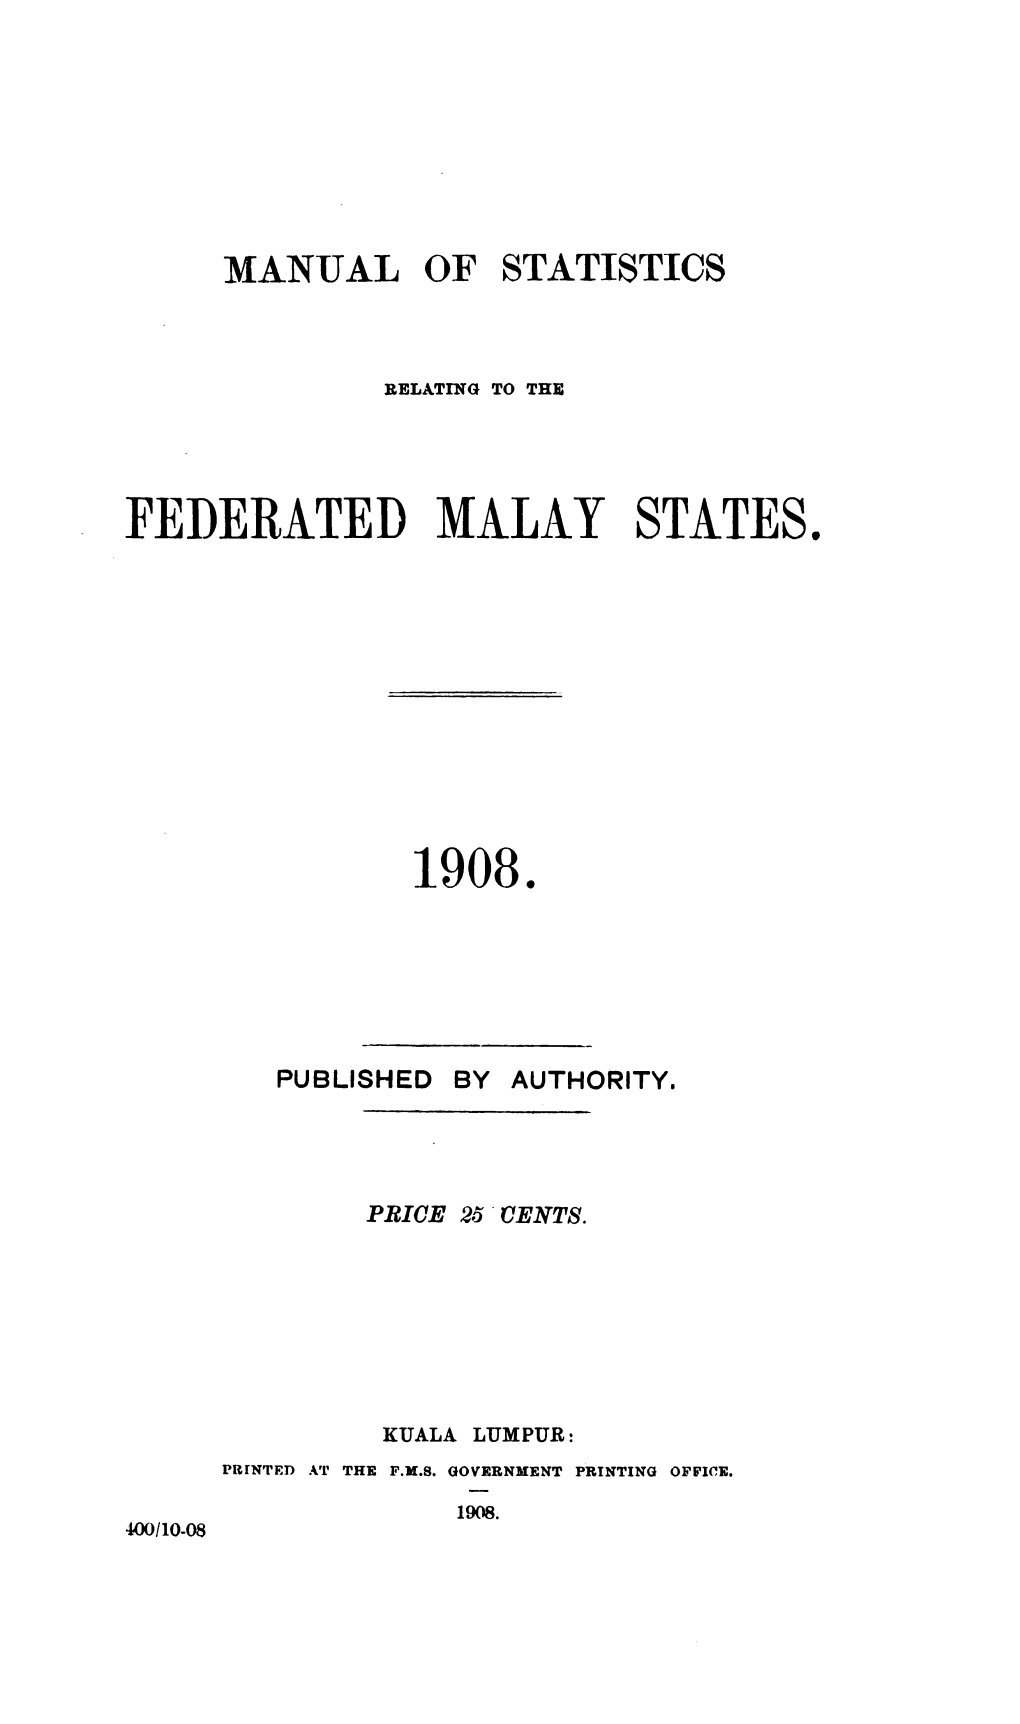 Manual of Statistics Relating to the Federated Malay States